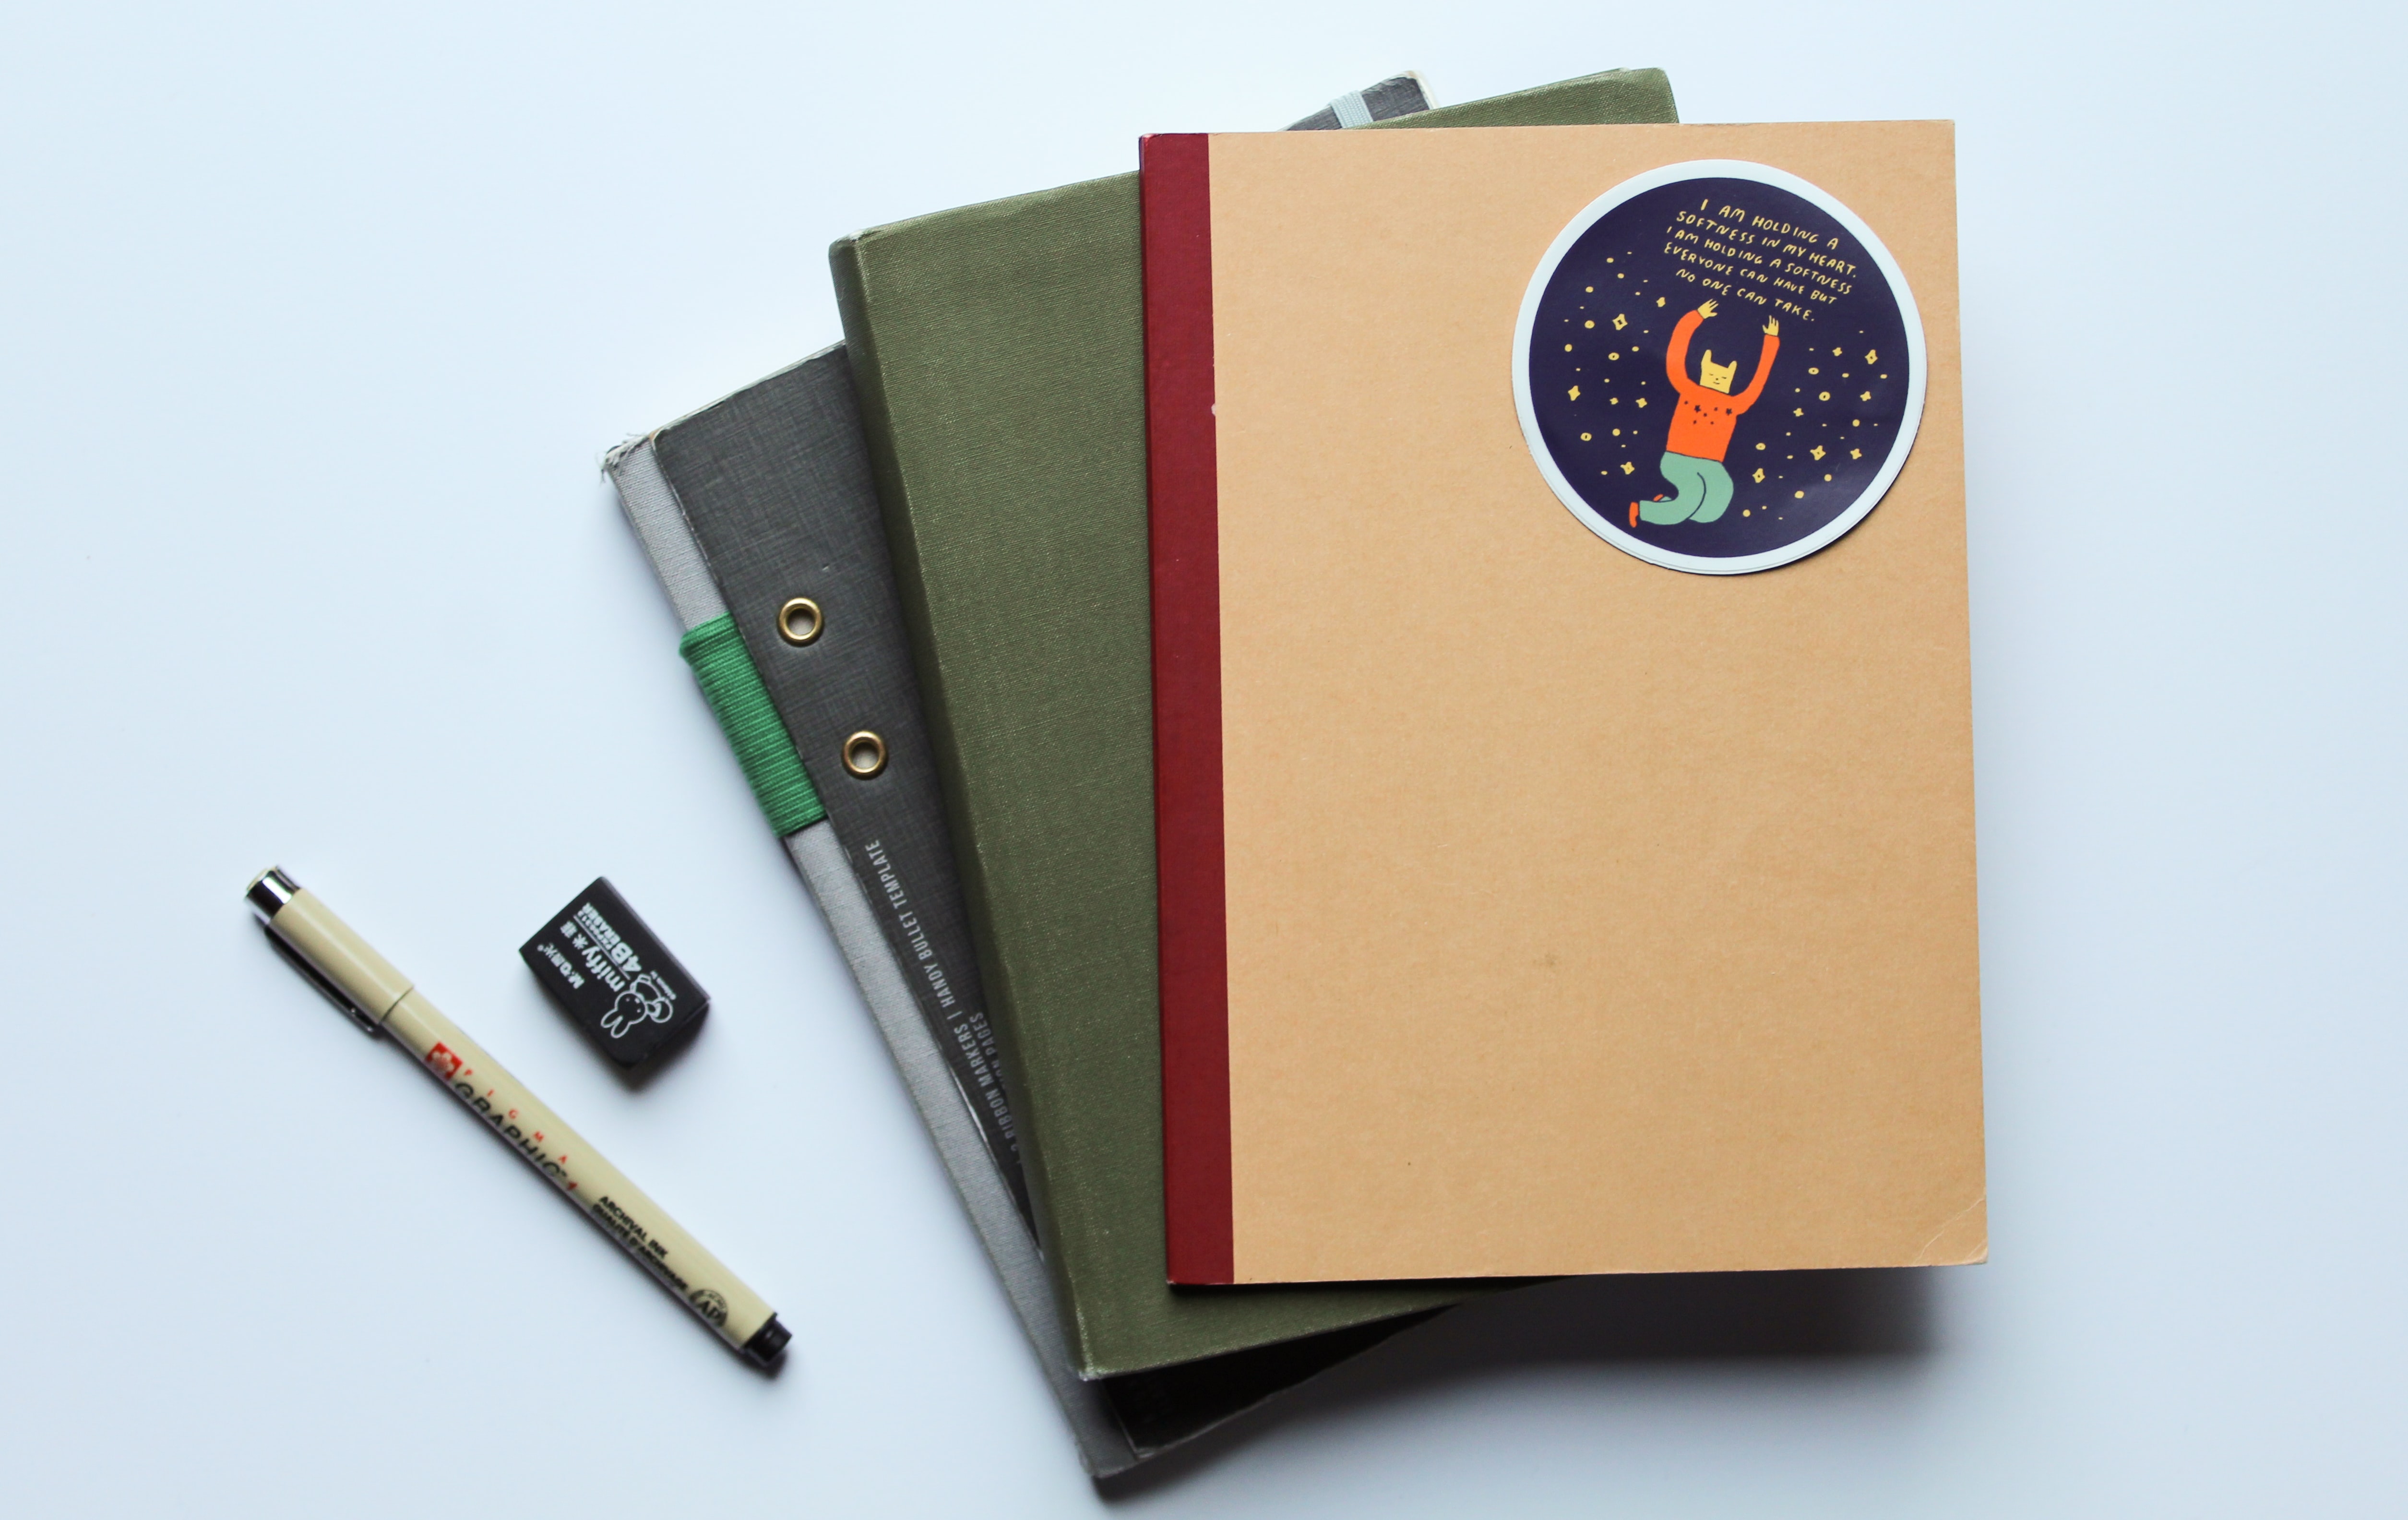 Want to build a journaling practice? Here are some simple tips to get you started.